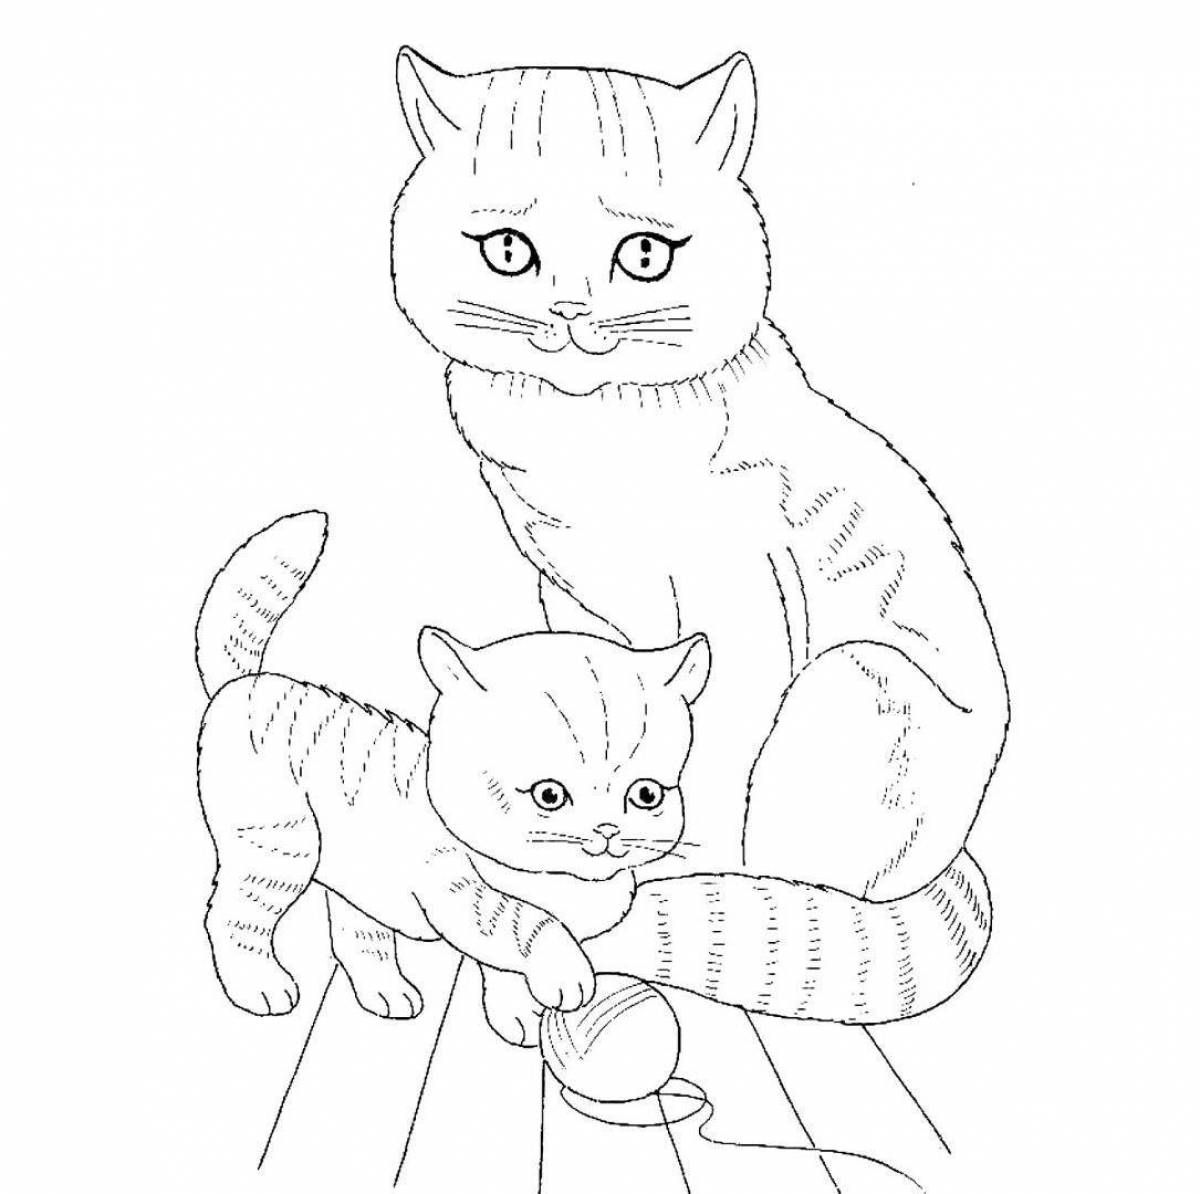 Colourful cat coloring book for children 6-7 years old